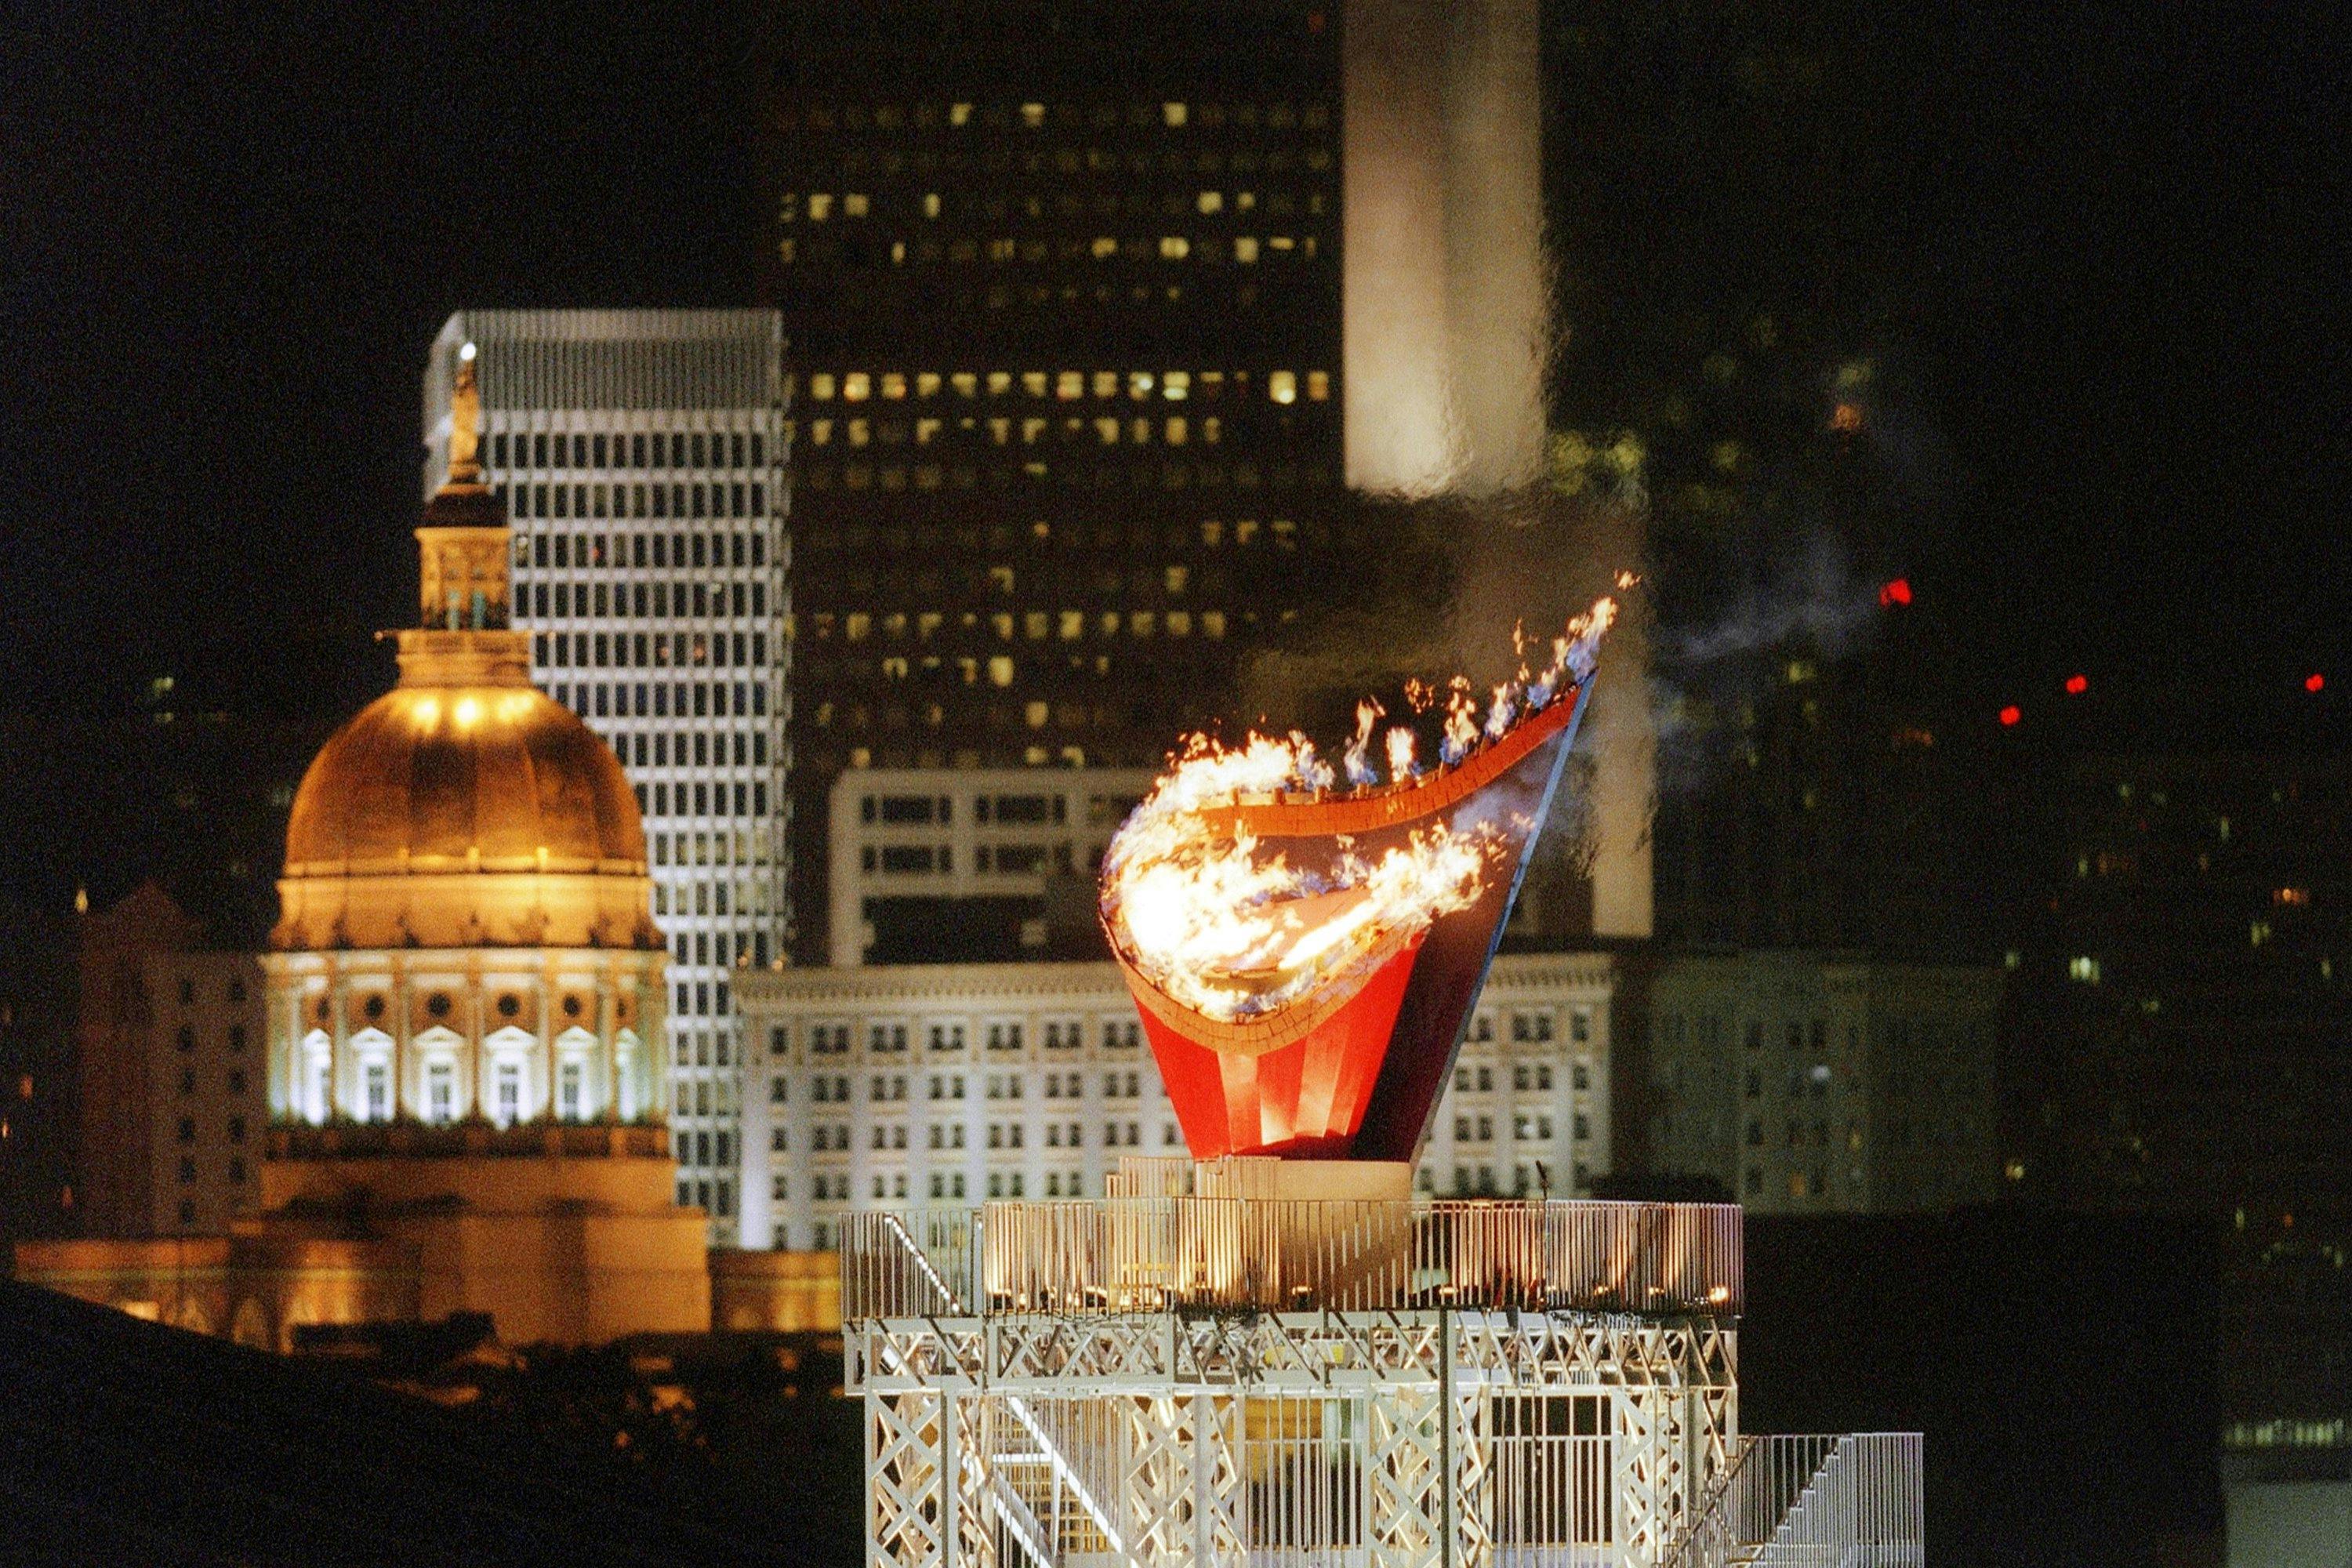 The Olympic flame as seen in front of the skyline of the southern Georgian city of Atlanta early 20 July 1996 at the end of the Centennial Olympic Games opening ceremony. Photo: PEDRO UGARTE/AFP via Getty Images